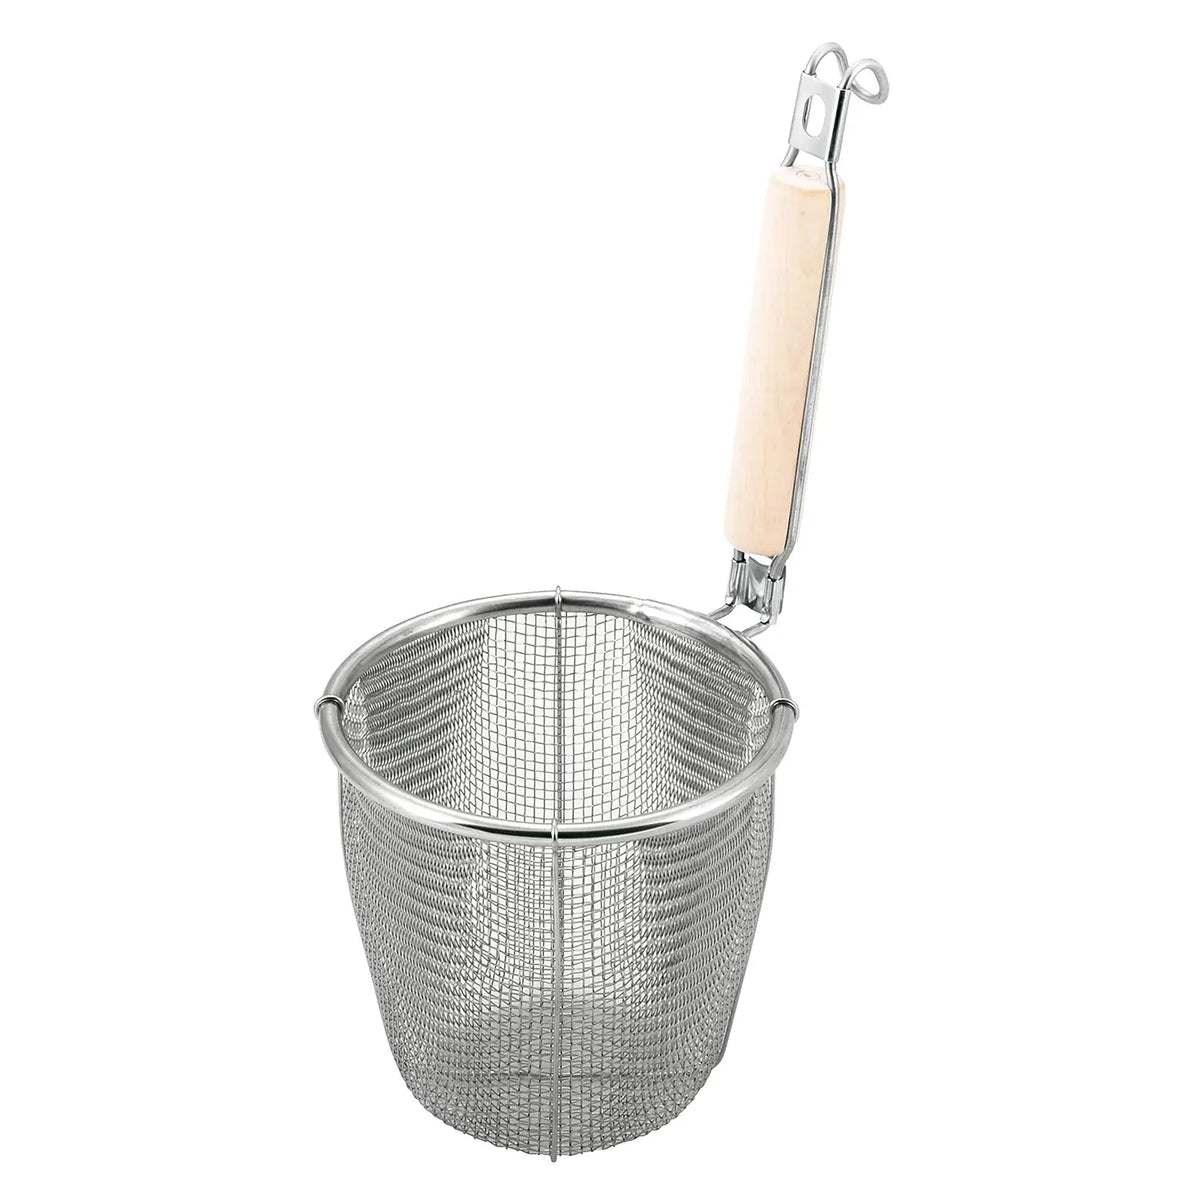 MINEX Stainless Steel Udon Tebo Noodle Strainer Flat Base with Plain Wooden Handle